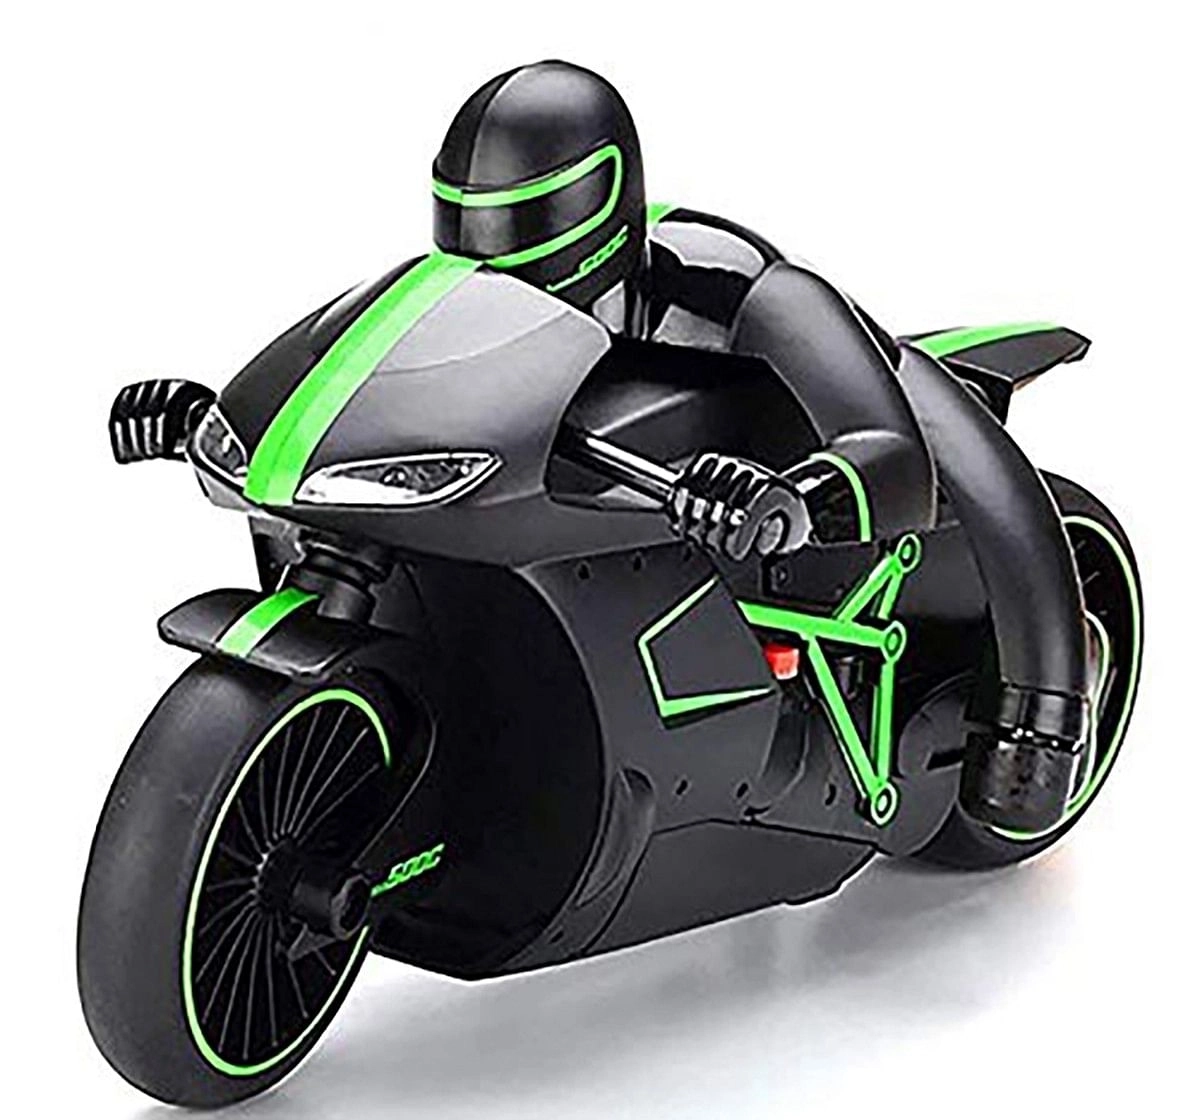  Crazon High Speed Remote Control Motorcycle Remote Control Toys for Kids age 3Y+ (Black)